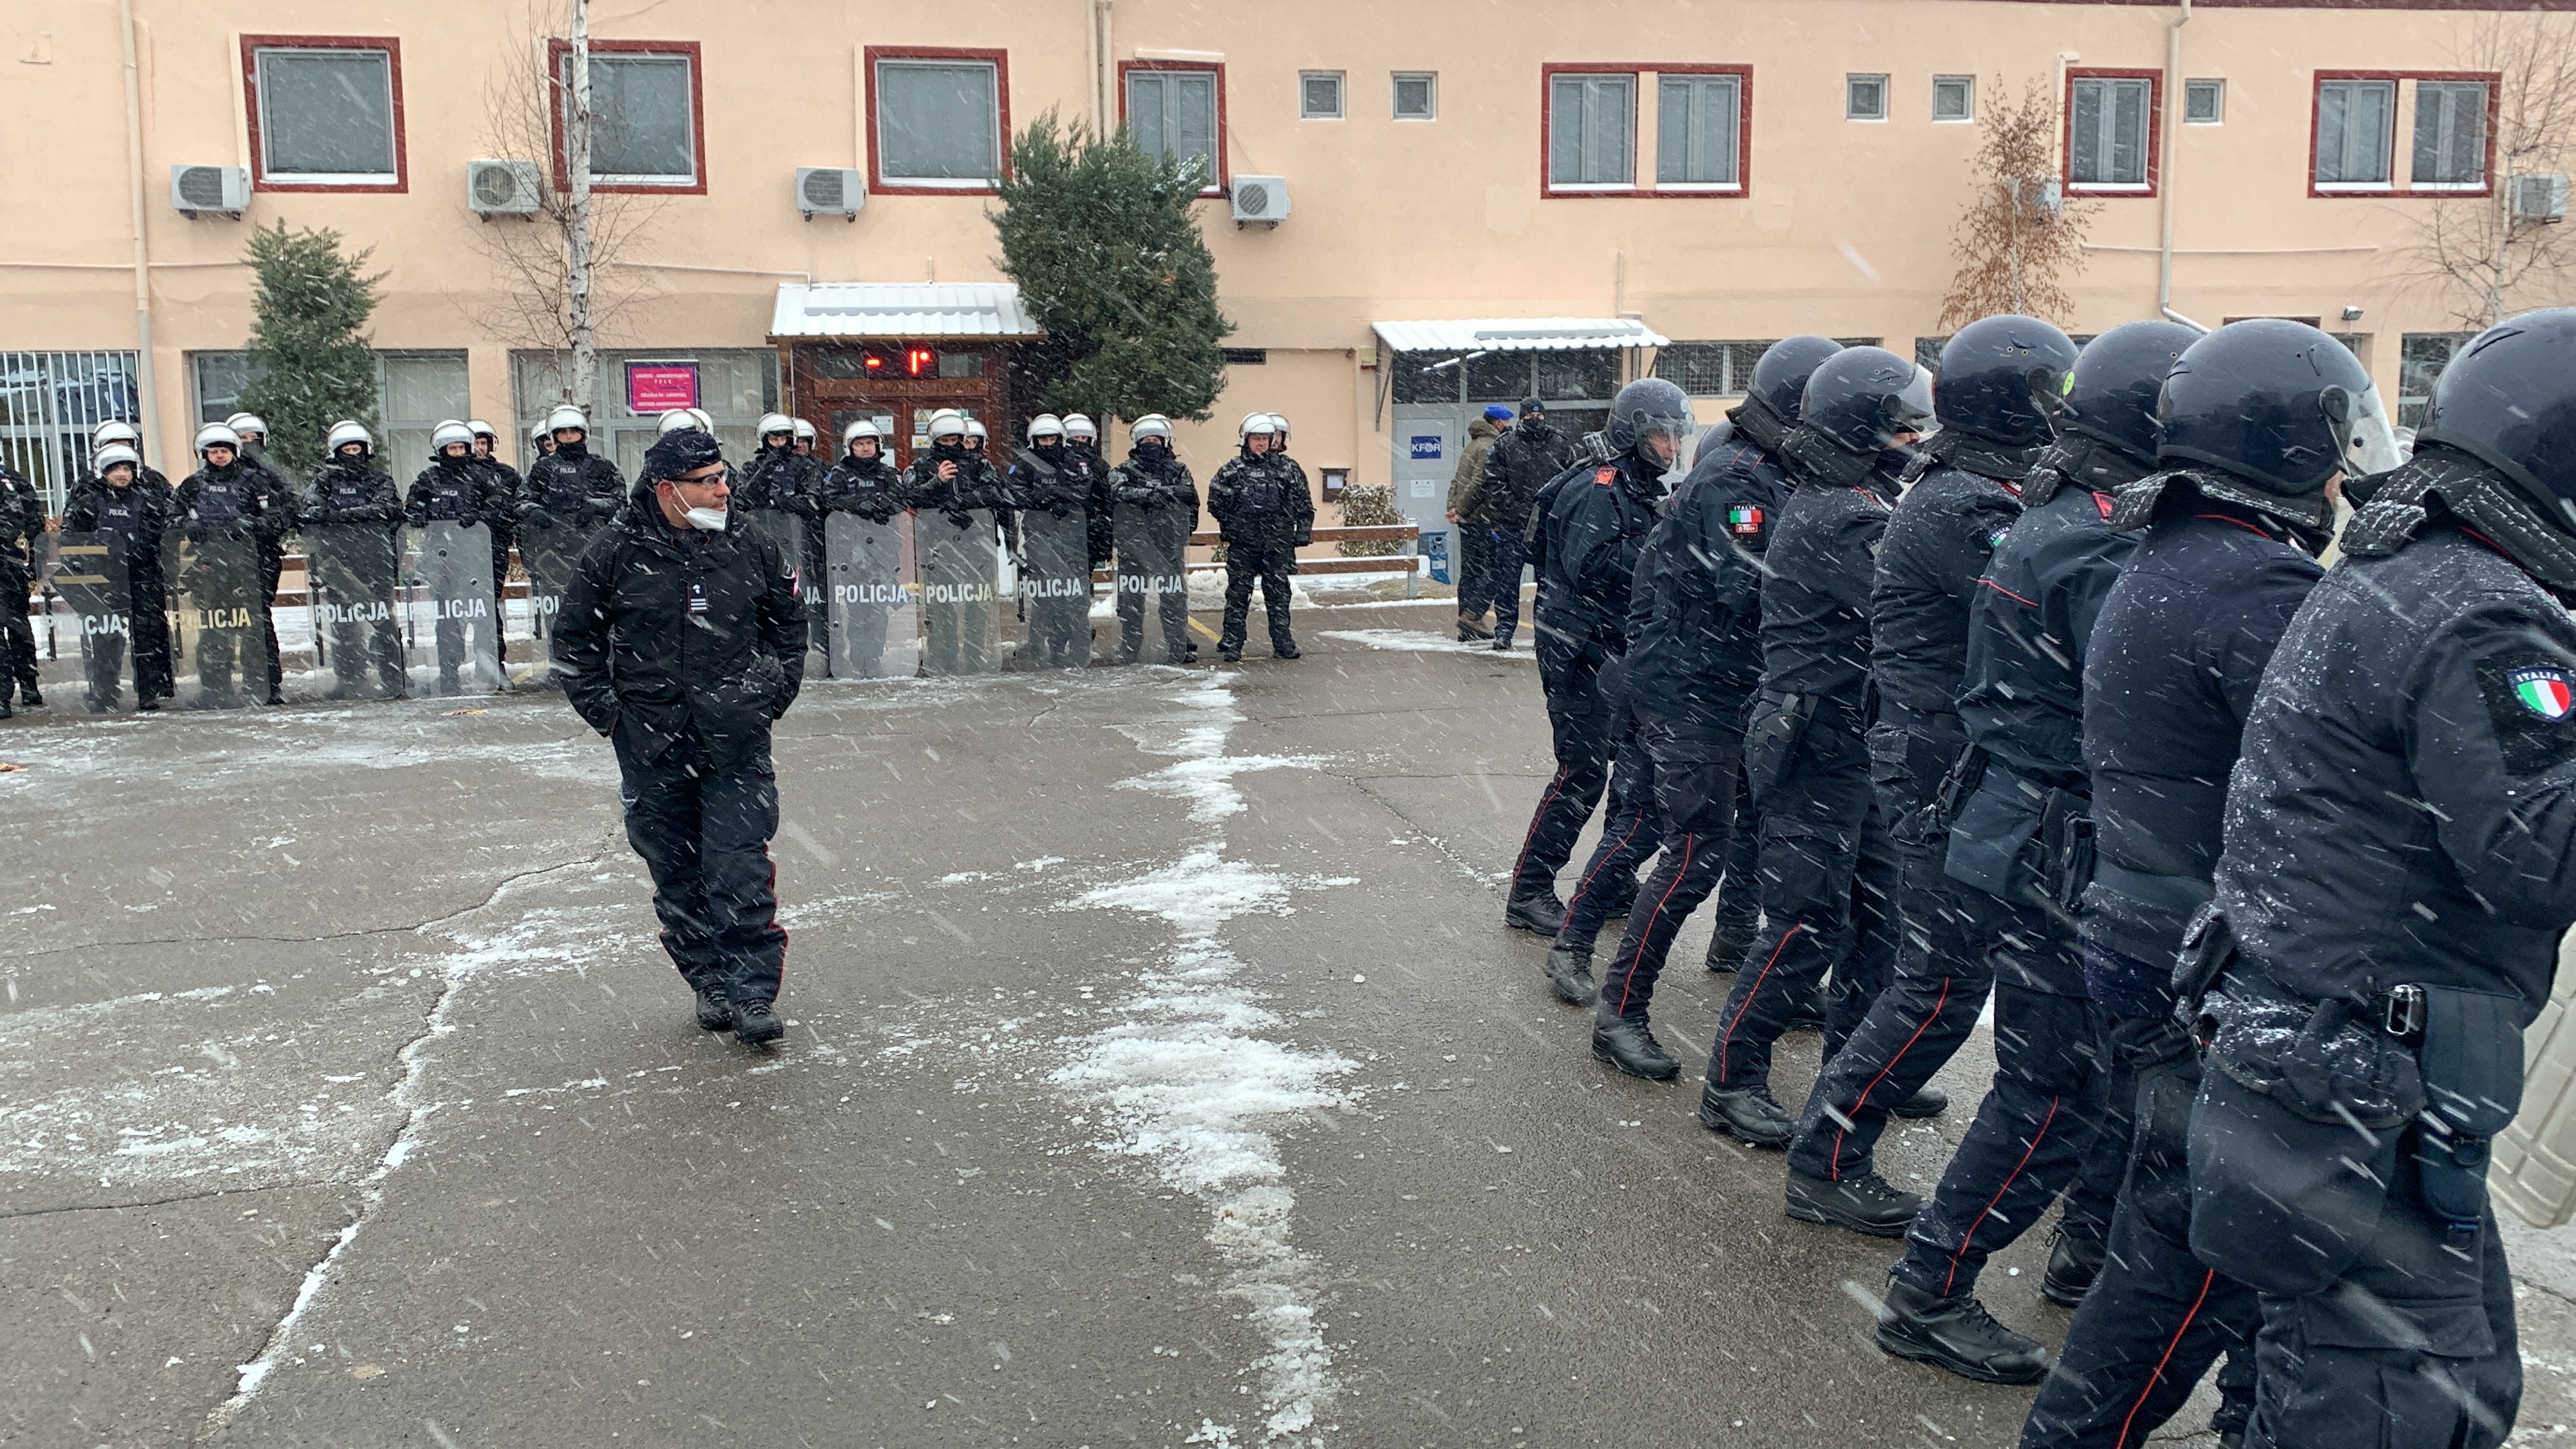 Joint Crowd and Riot Control Workshop between EULEX’s Formed Police Unit and KFOR’s Multinational Specialized Unit